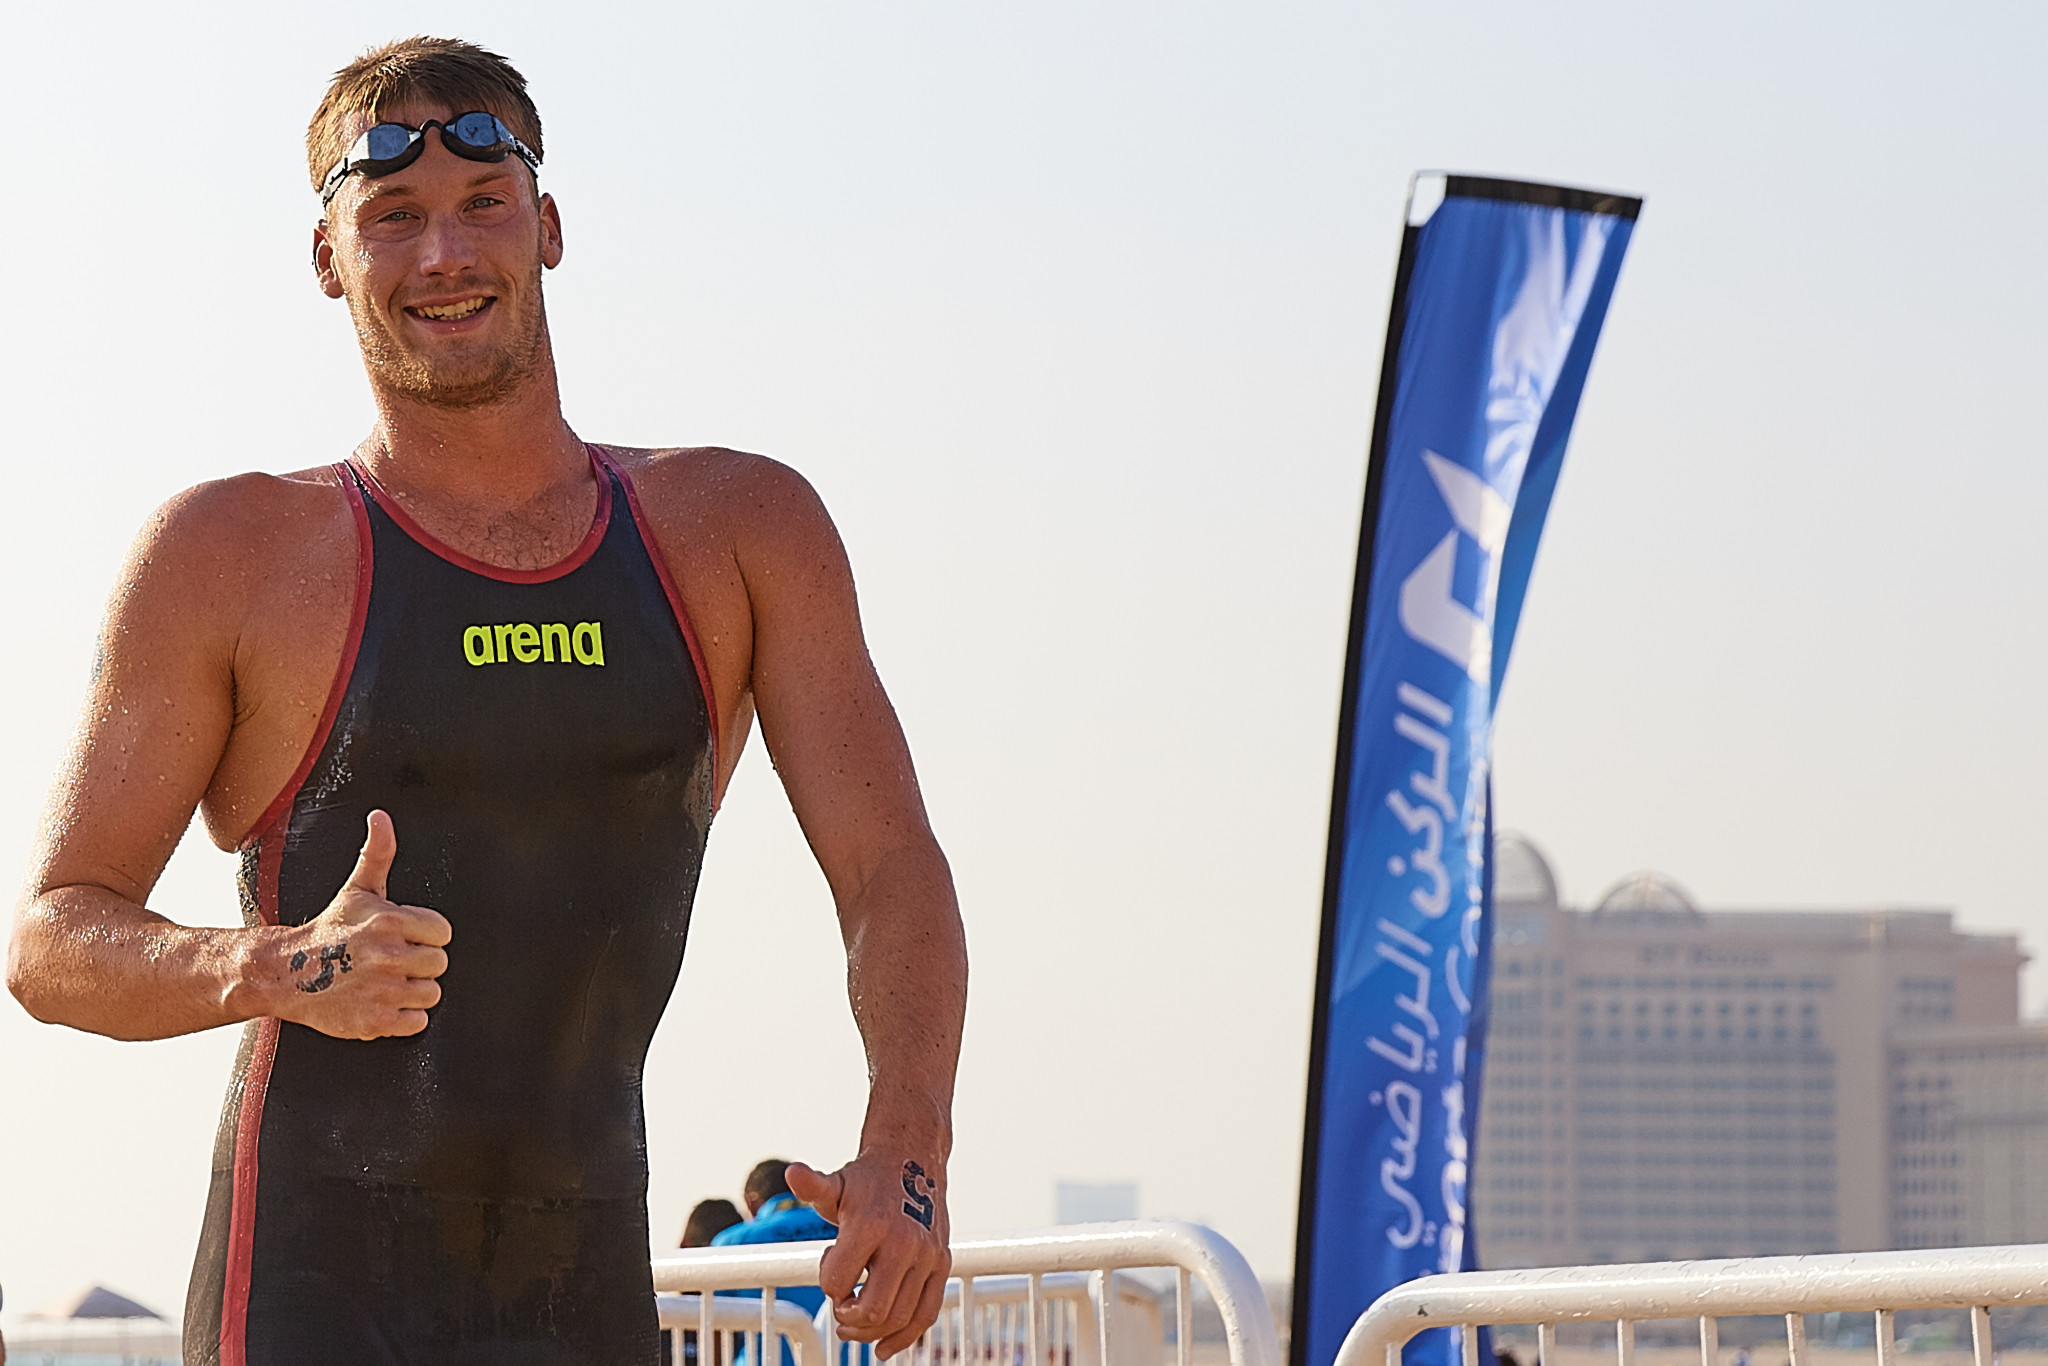 Italy's Marcello Guidi will go down in history as the first-ever ANOC World Beach Games gold medallist after winning the open water swimming 5km race ©ANOC World Beach Games